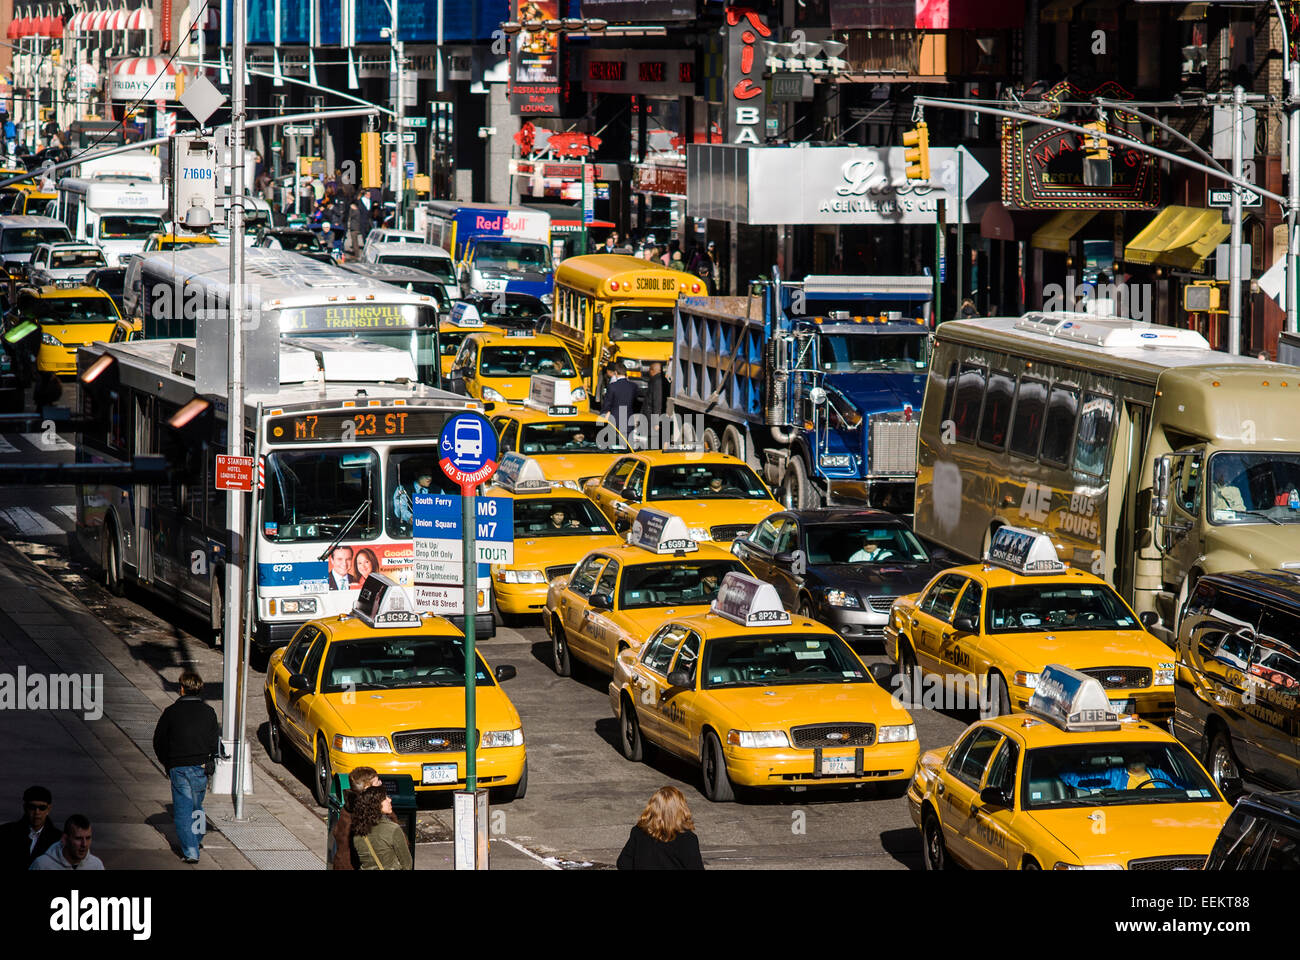 Traffic jam with yellow taxis New York City Stock Photo